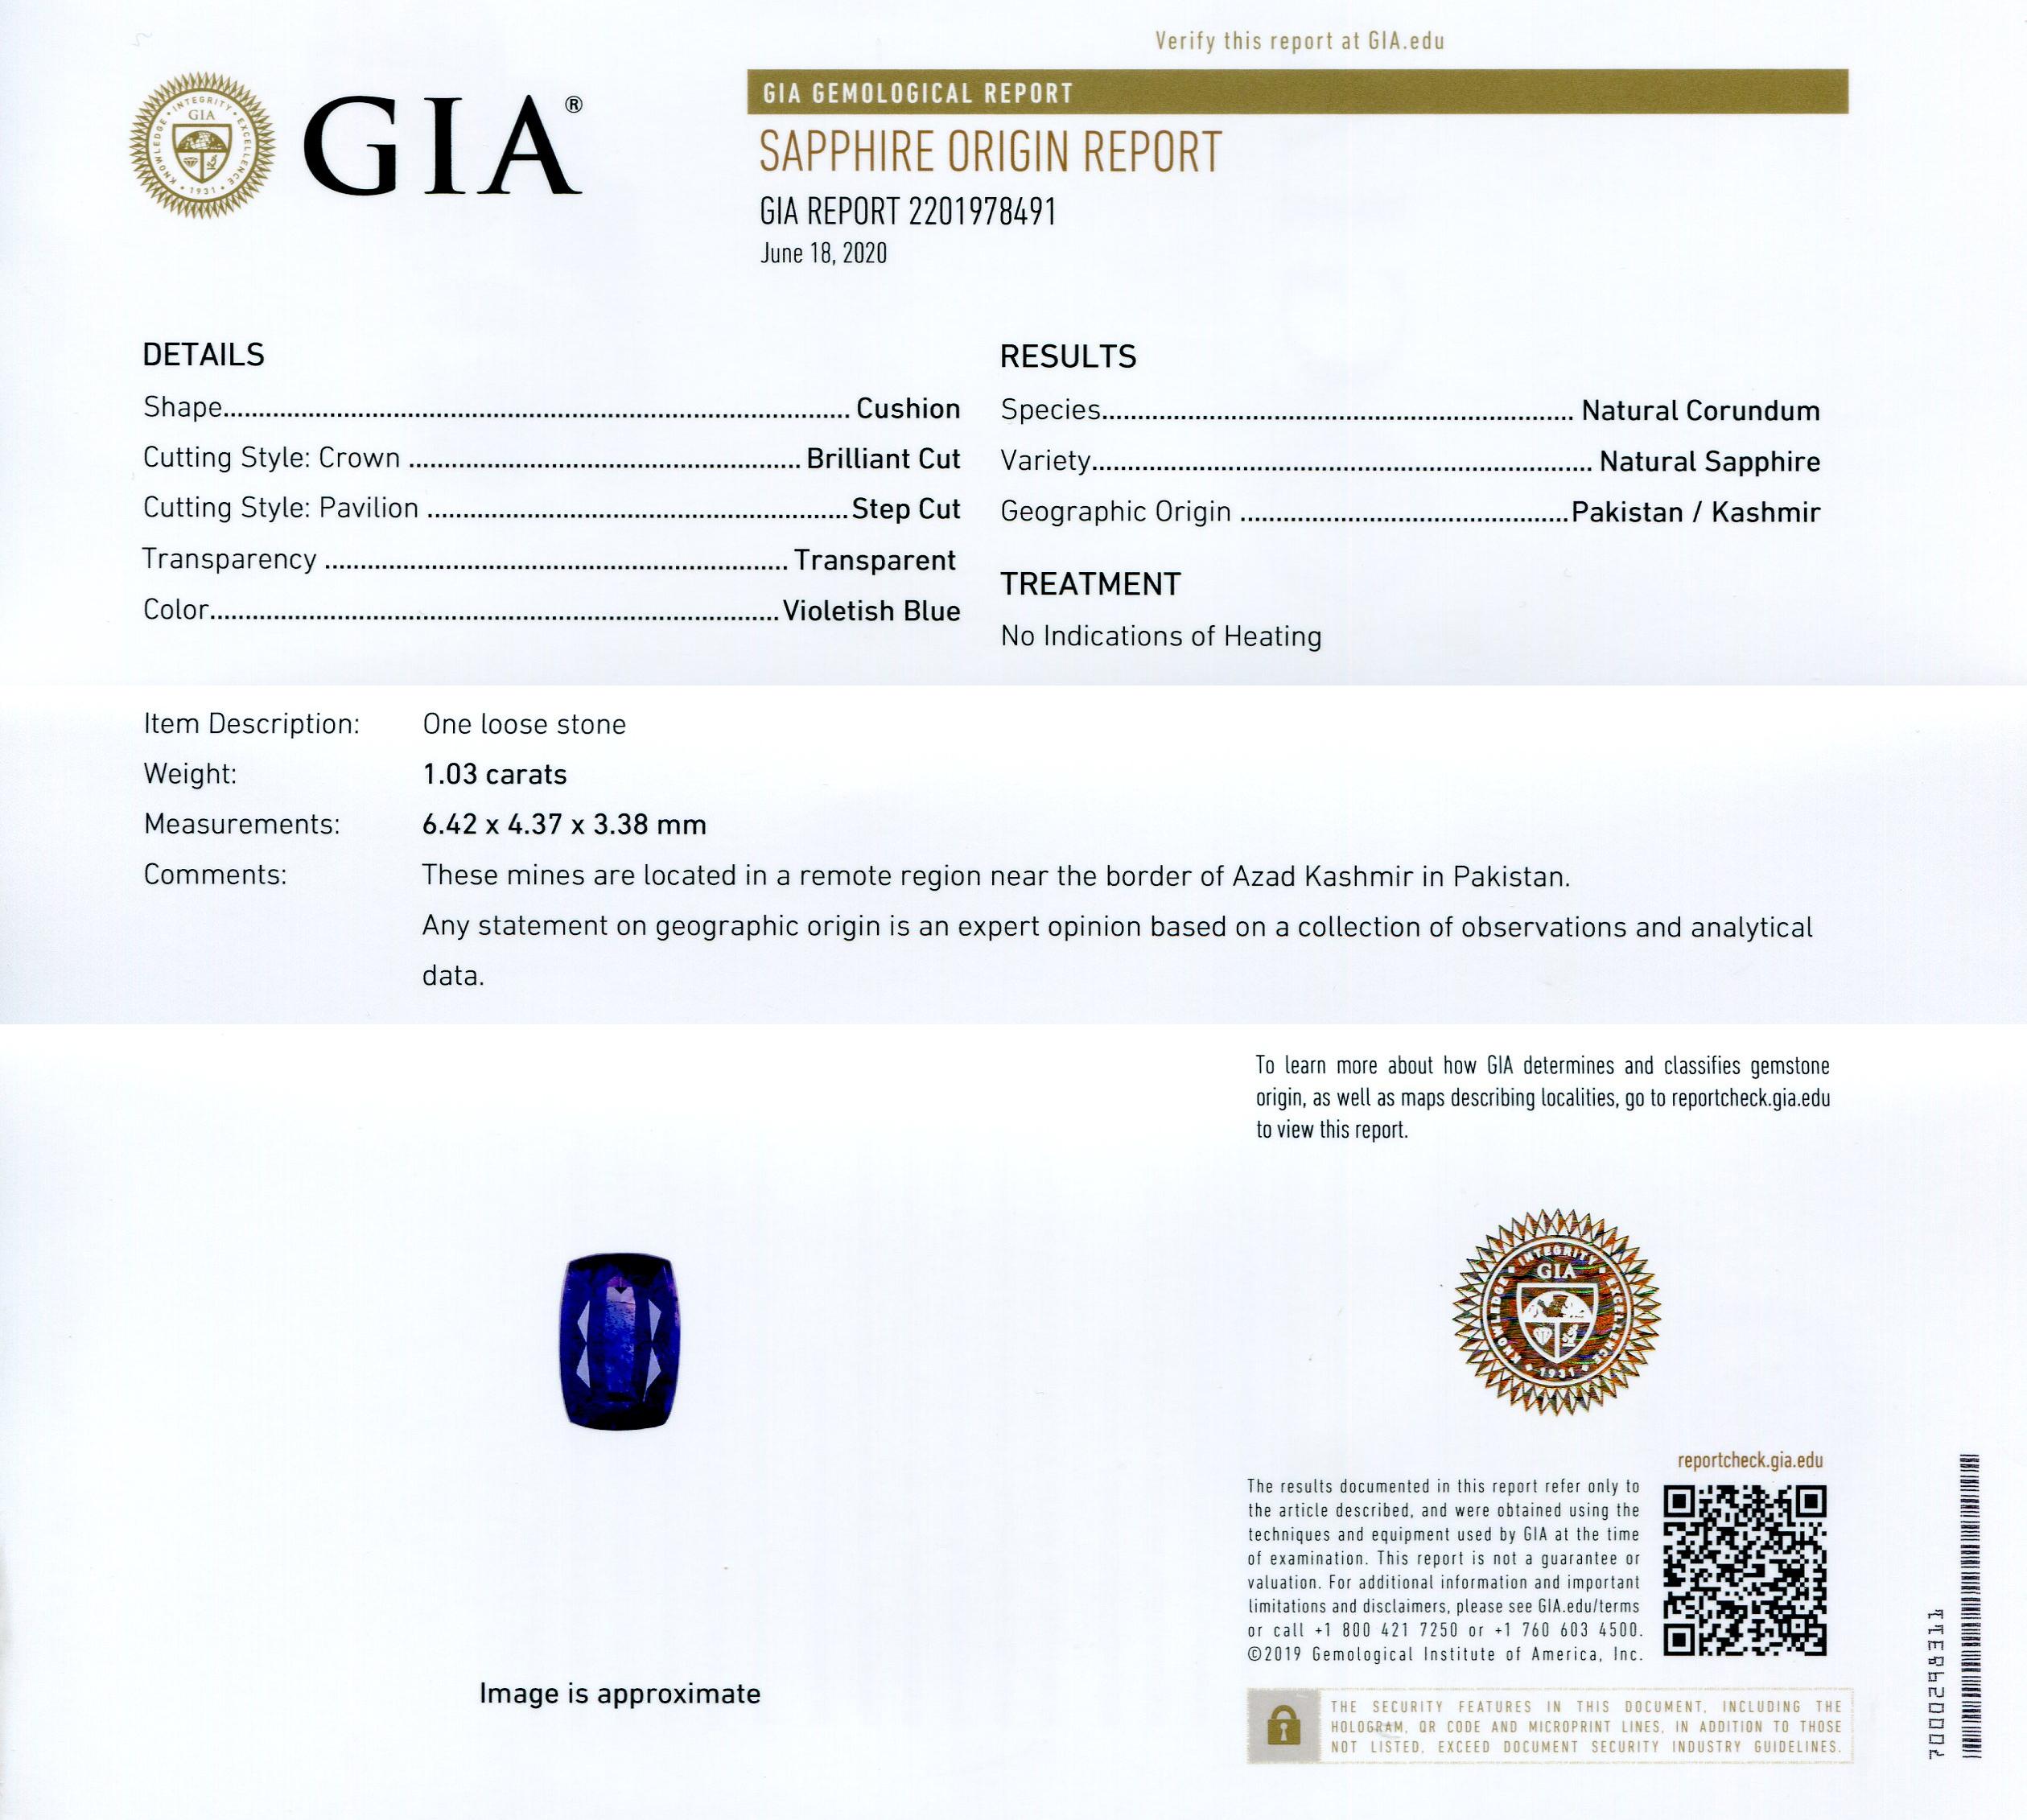 This is a stunning GIA Certified Sapphire

The GIA report reads as follows:

GIA Report Number: 2201978491
Shape: Cushion
Cutting Style: 
Cutting Style: Crown: Brilliant Cut
Cutting Style: Pavilion: Step Cut
Transparency: Transparent
Color: